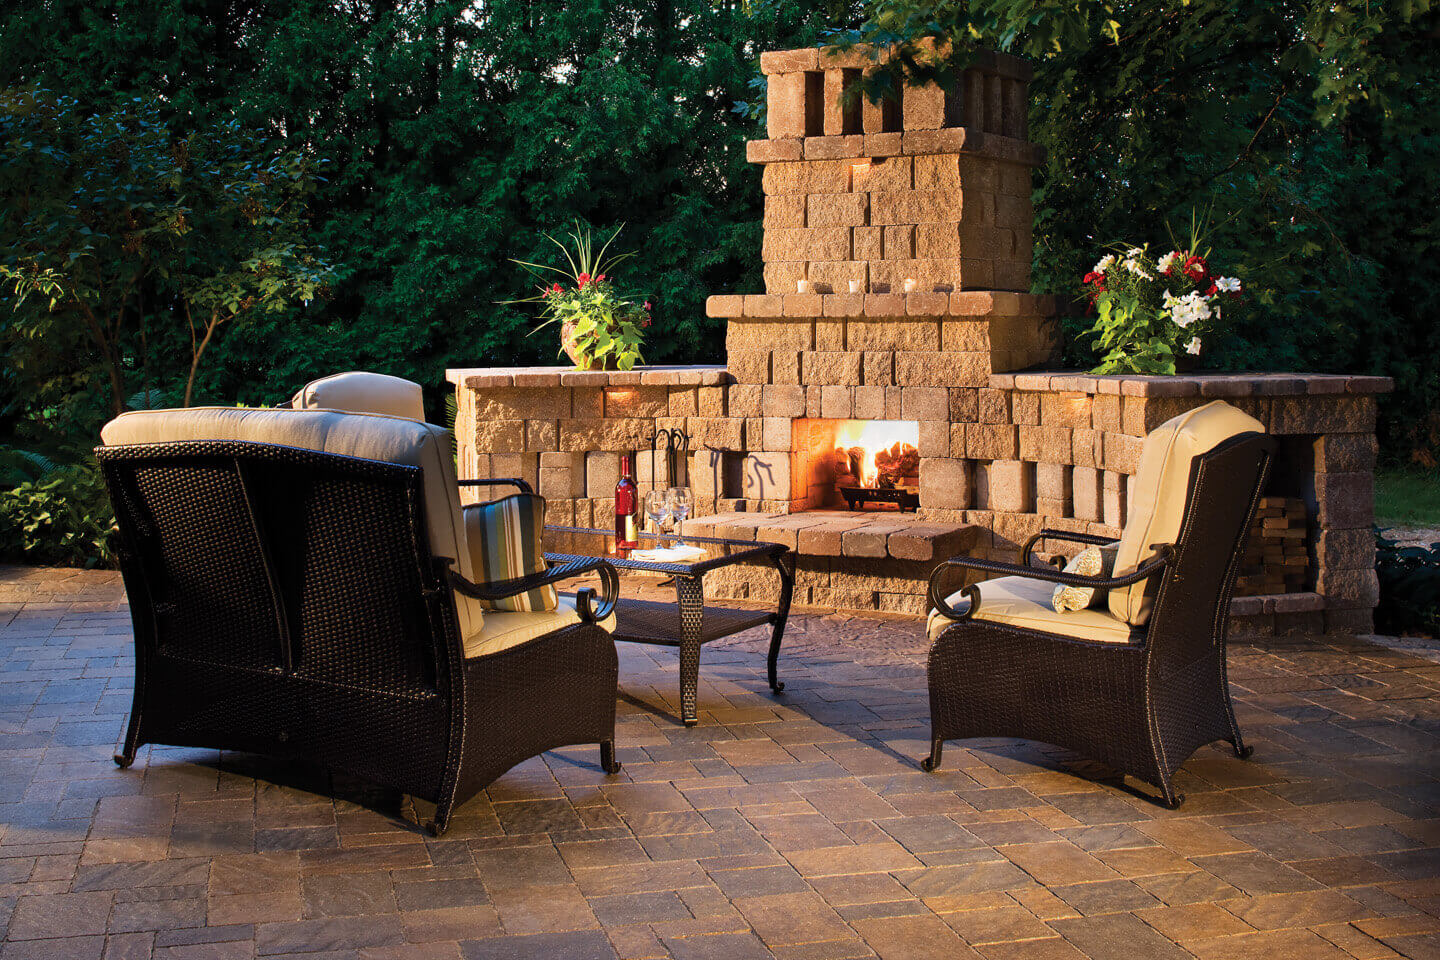 Patio and fireplace